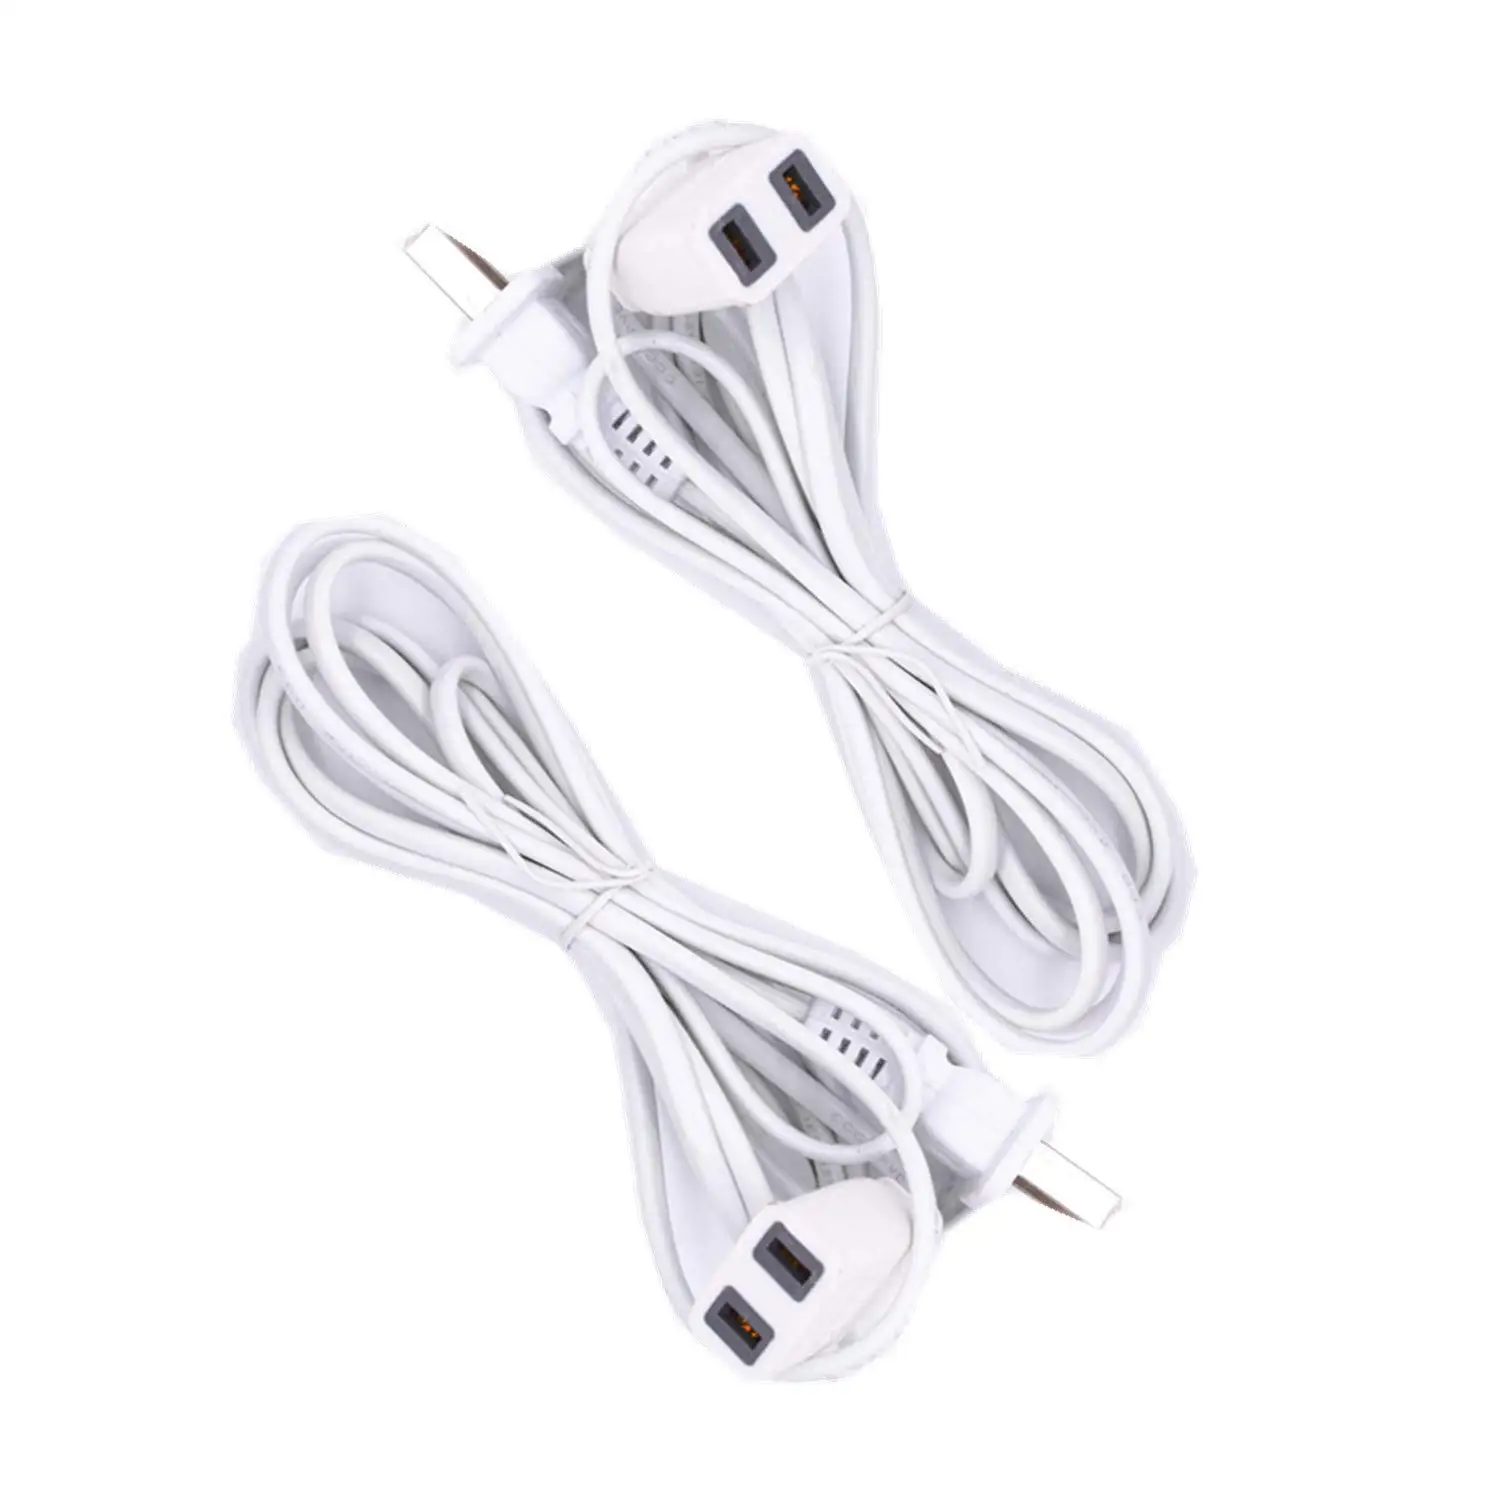 6.6ft Long Cord USB Power Strip with 2 Prong Extension Cord Power Strip White